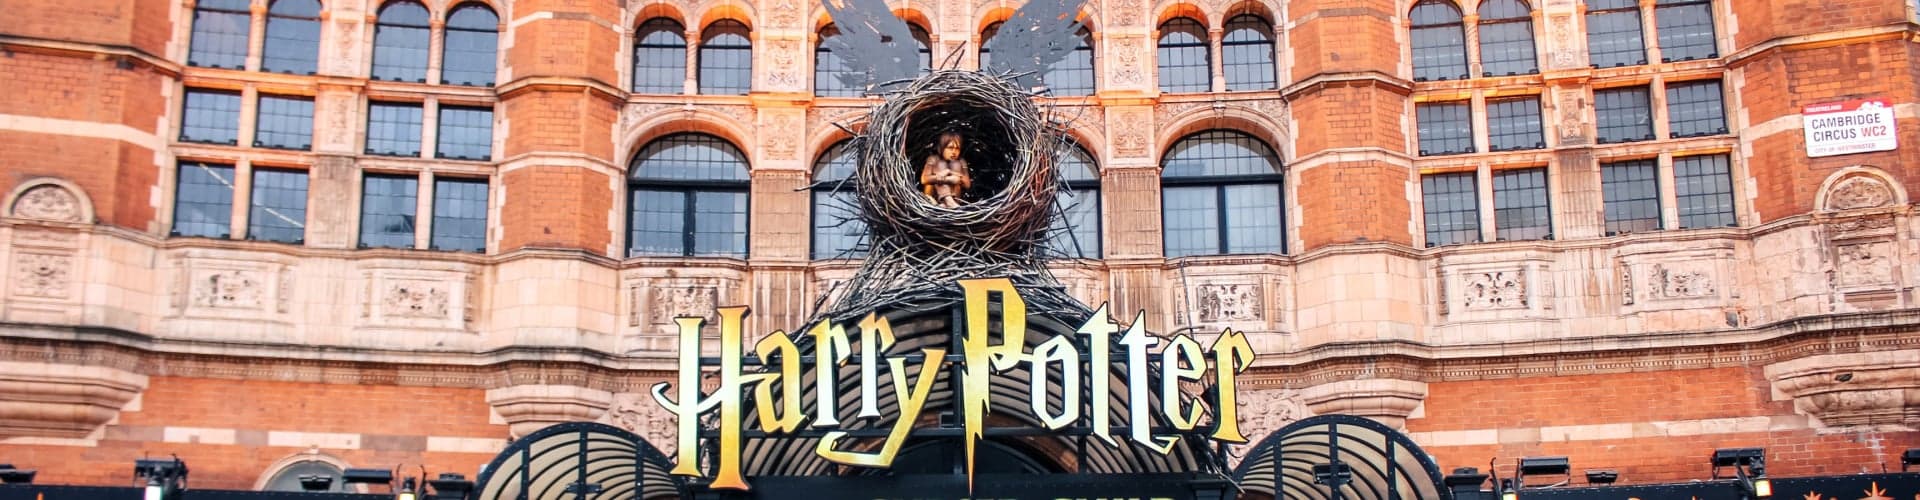 Free Harry Potter Tour Banner